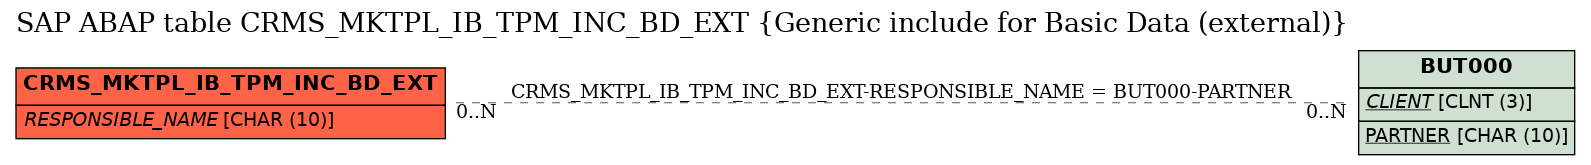 E-R Diagram for table CRMS_MKTPL_IB_TPM_INC_BD_EXT (Generic include for Basic Data (external))